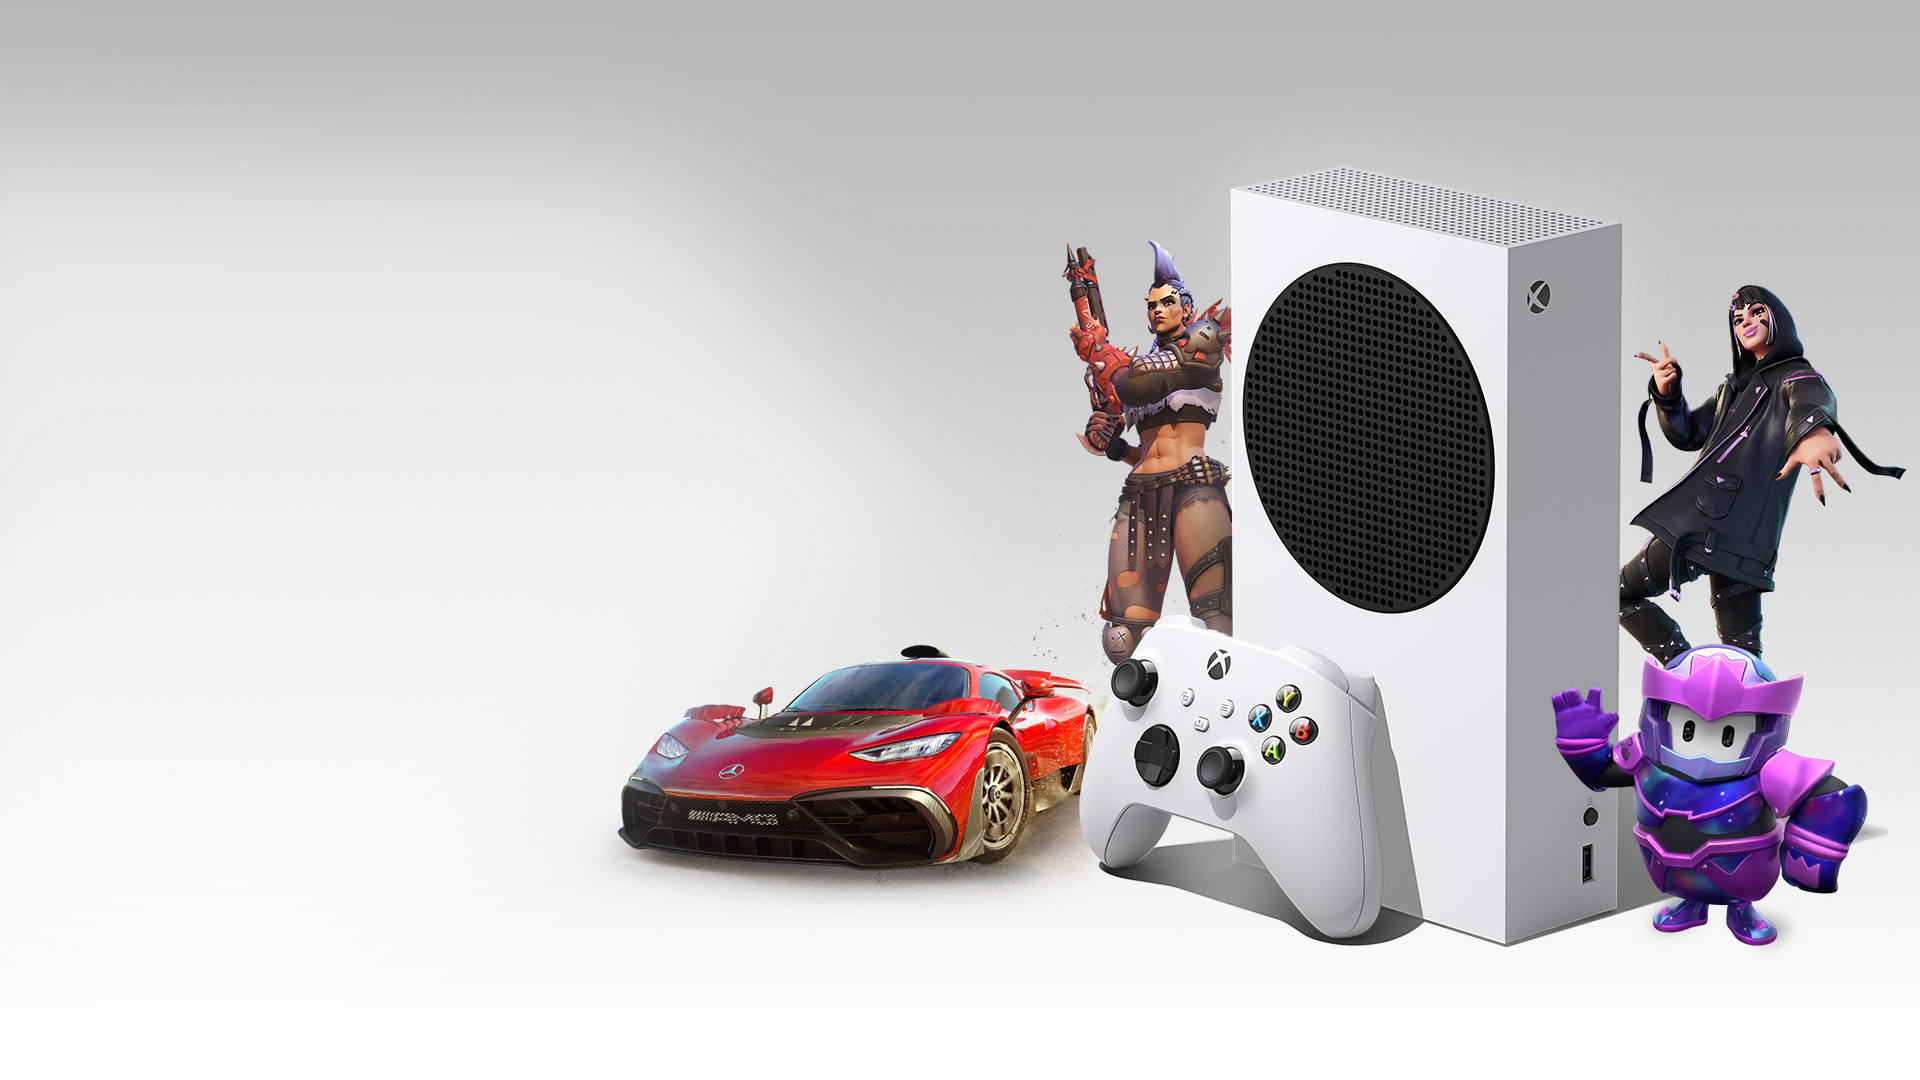 An Xbox Series S surrounded by characters from Overwatch 2, Fortnite, Fall Guys and the Mercedes-AMG One from Forza Horizon 5.